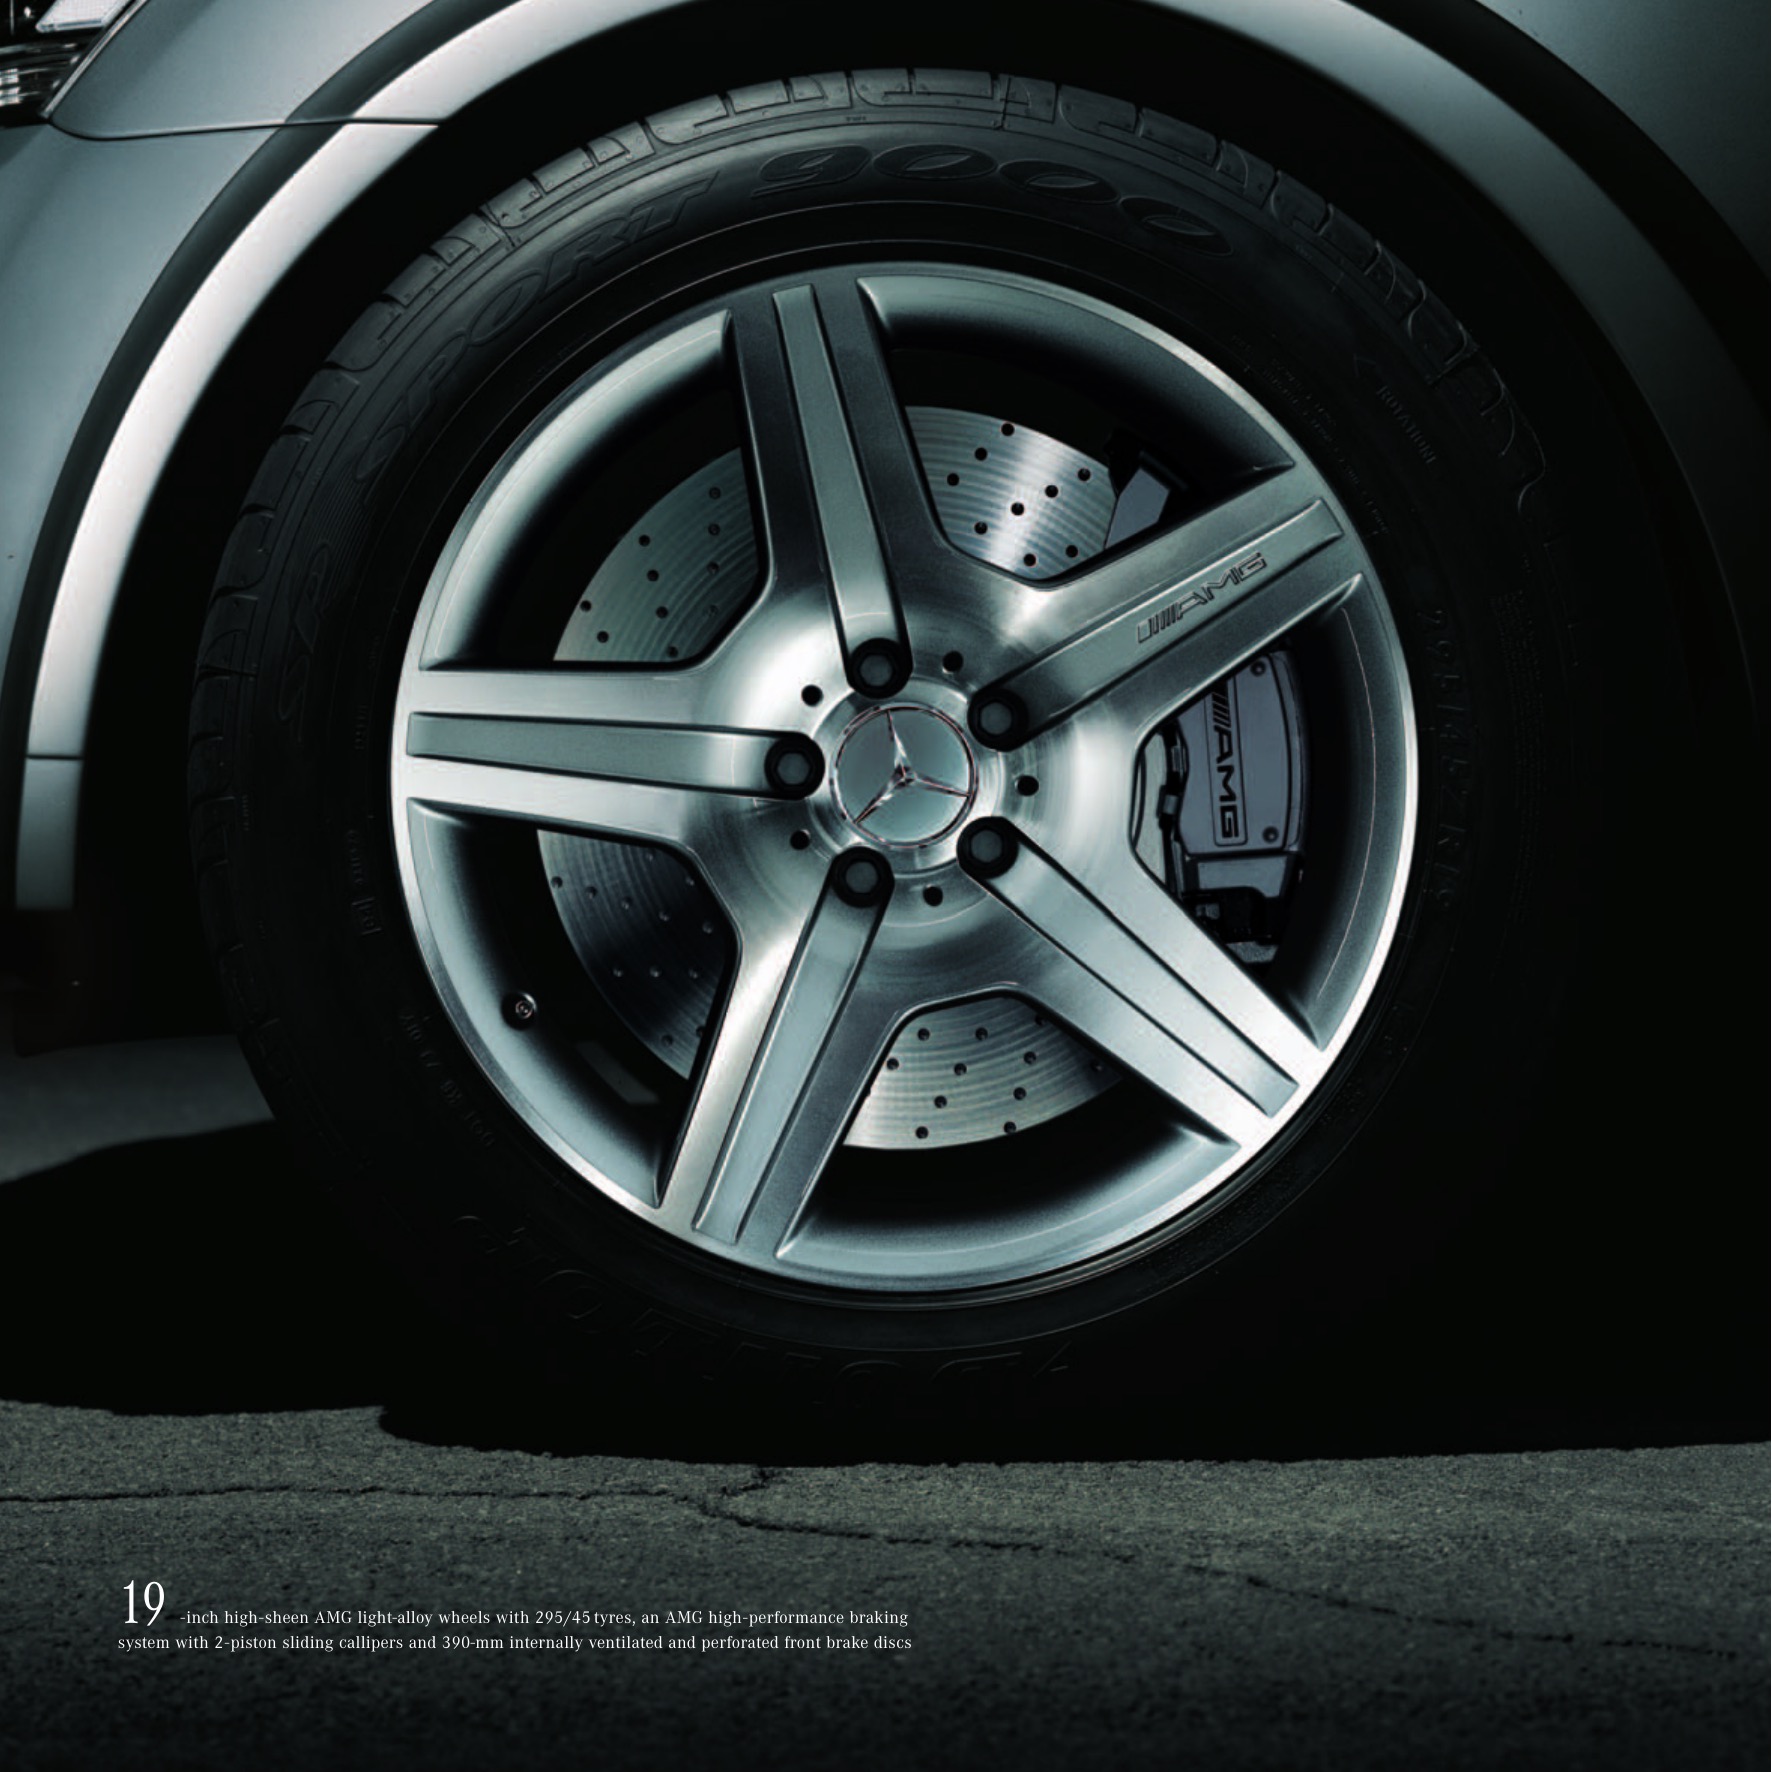 2006 Mercedes-Benz ML-Class AMG Brochure Page 7